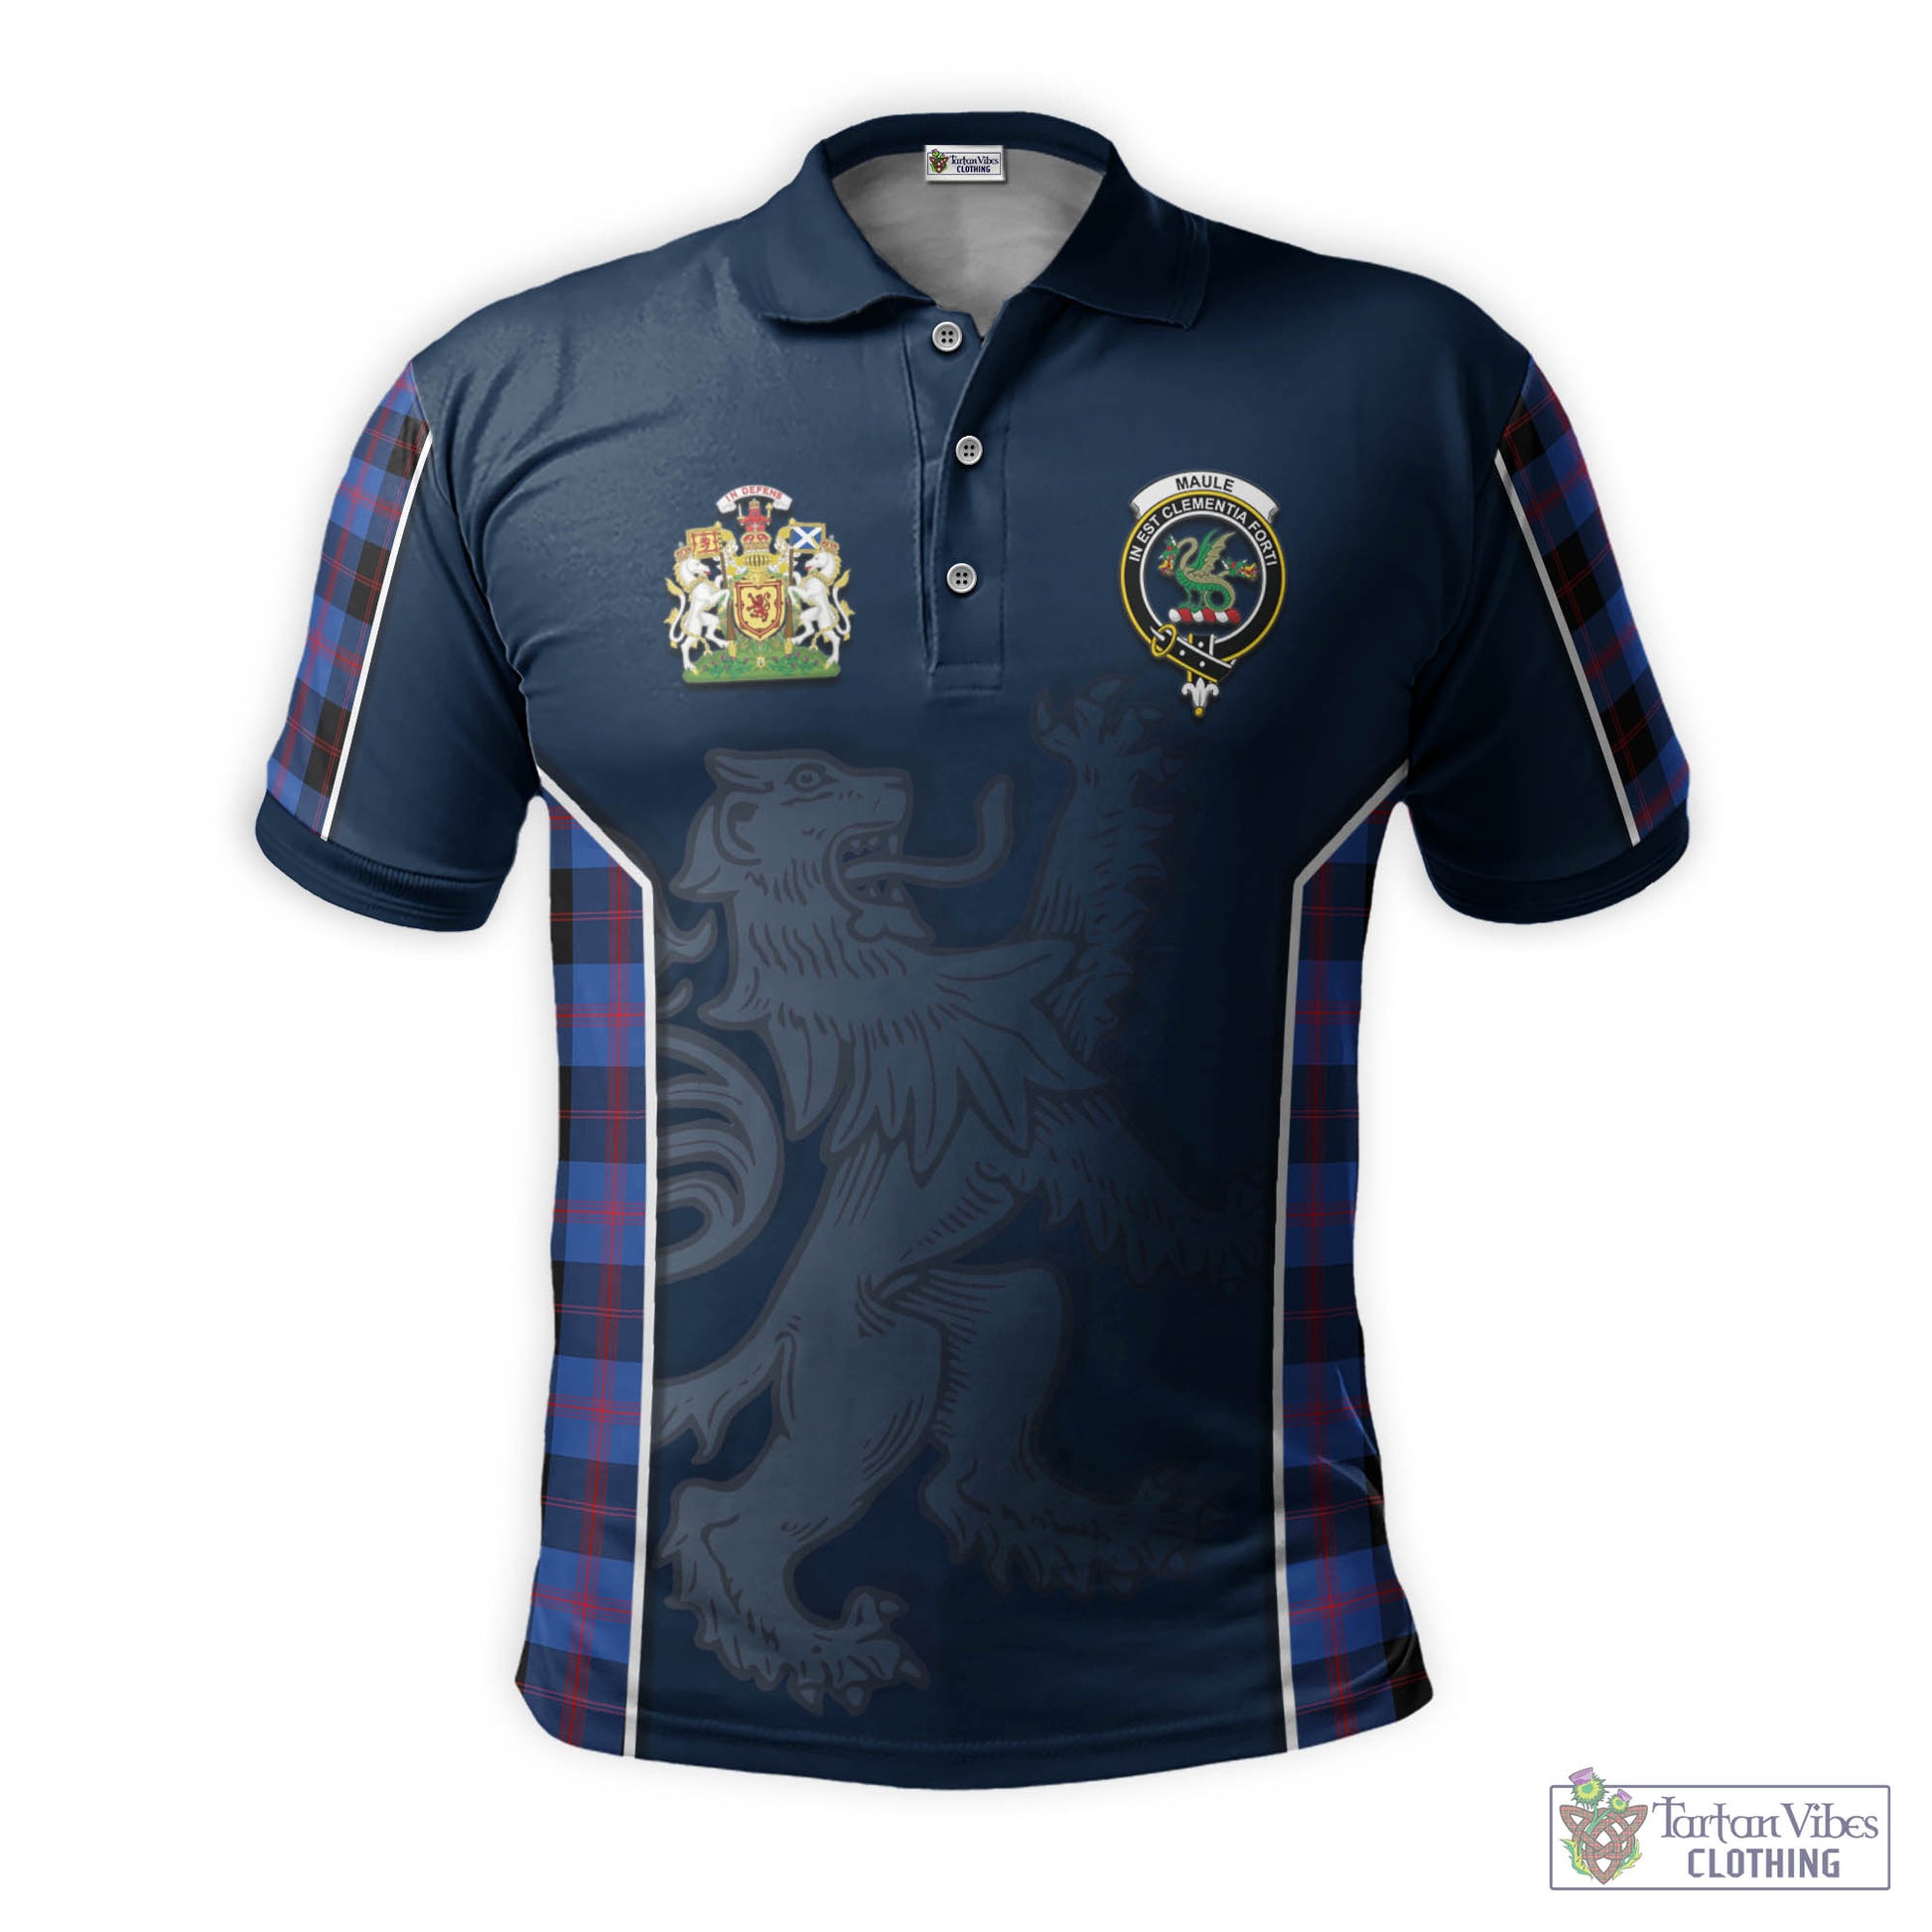 Tartan Vibes Clothing Maule Tartan Men's Polo Shirt with Family Crest and Lion Rampant Vibes Sport Style